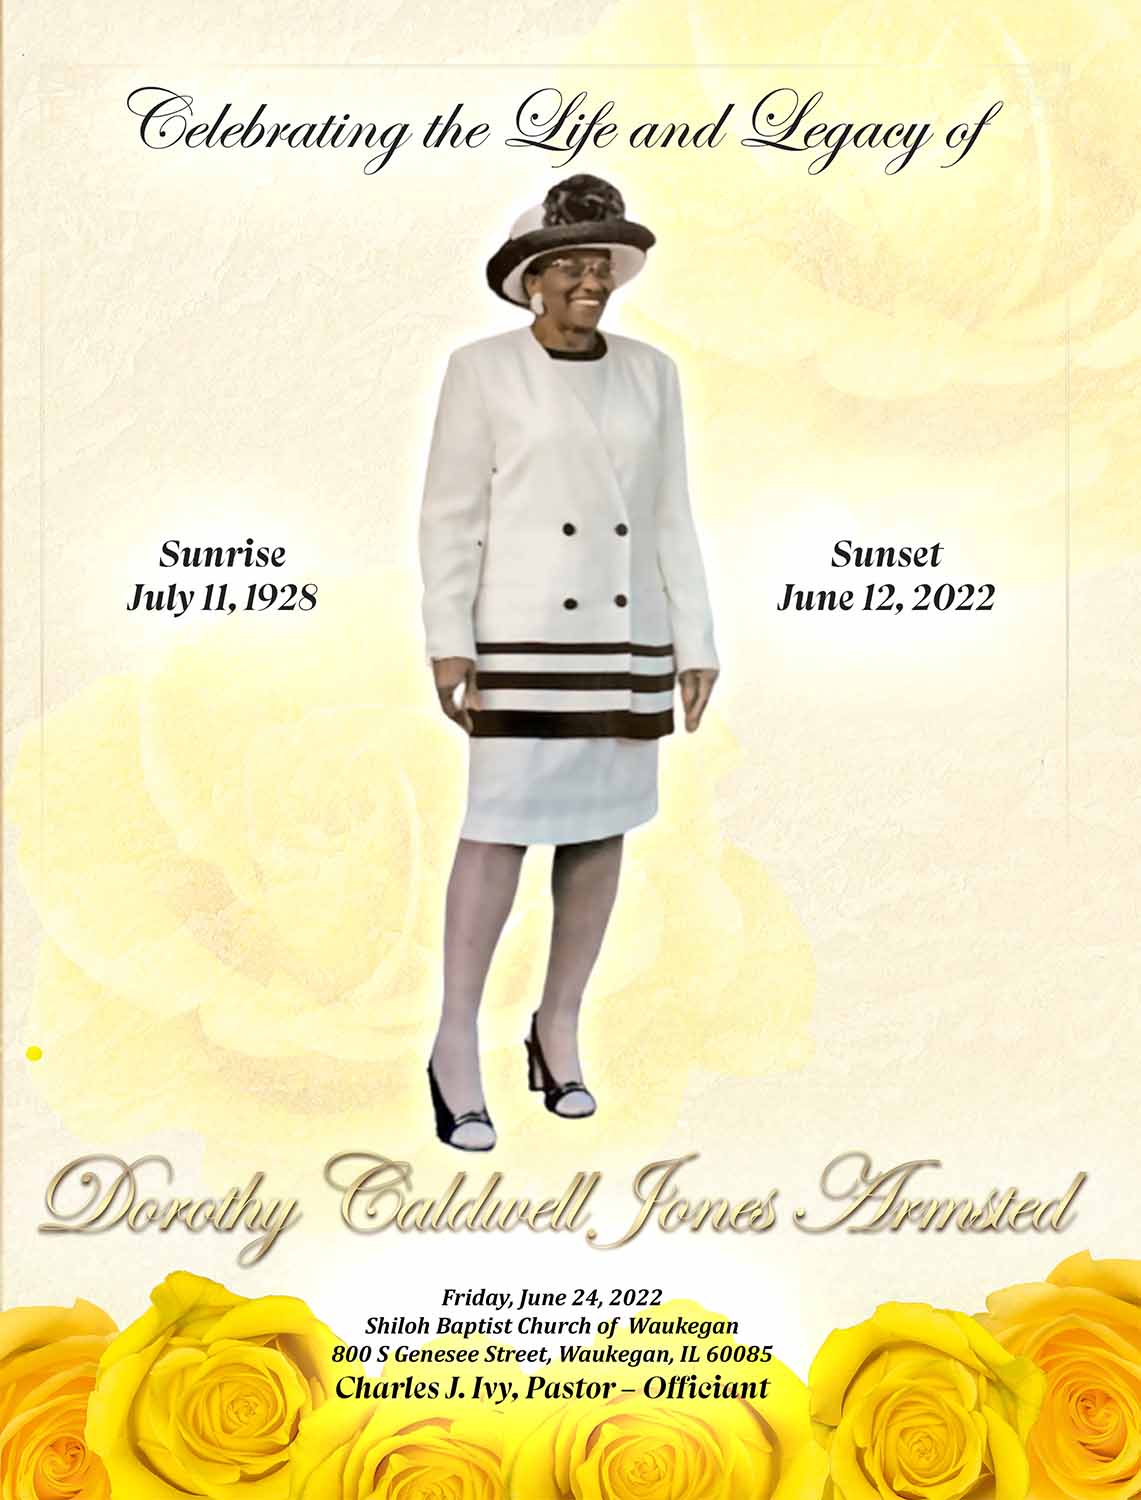 Dorothy Caldwell Armsted 1928 – 2022